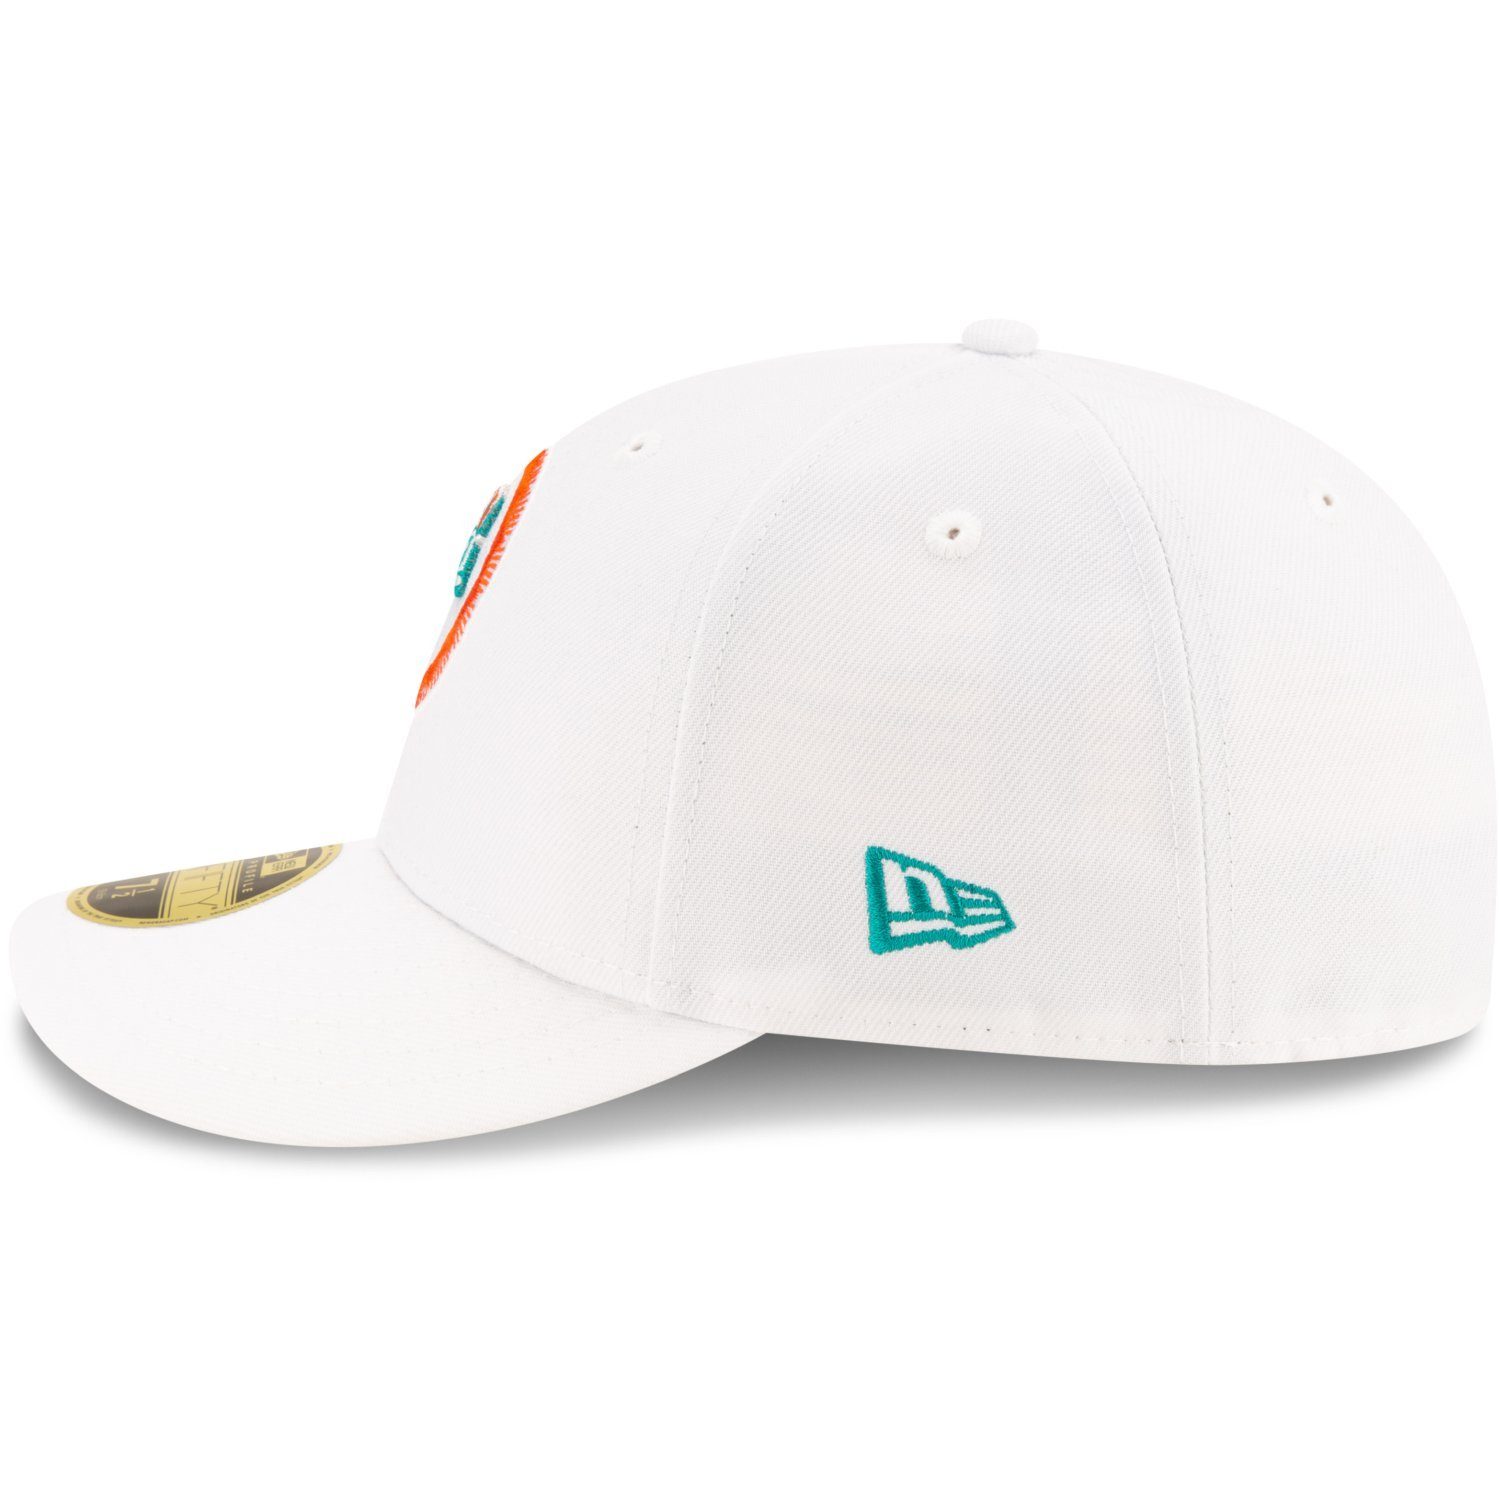 New Era Low Profile RETRO 59Fifty Fitted Miami Dolphins Cap